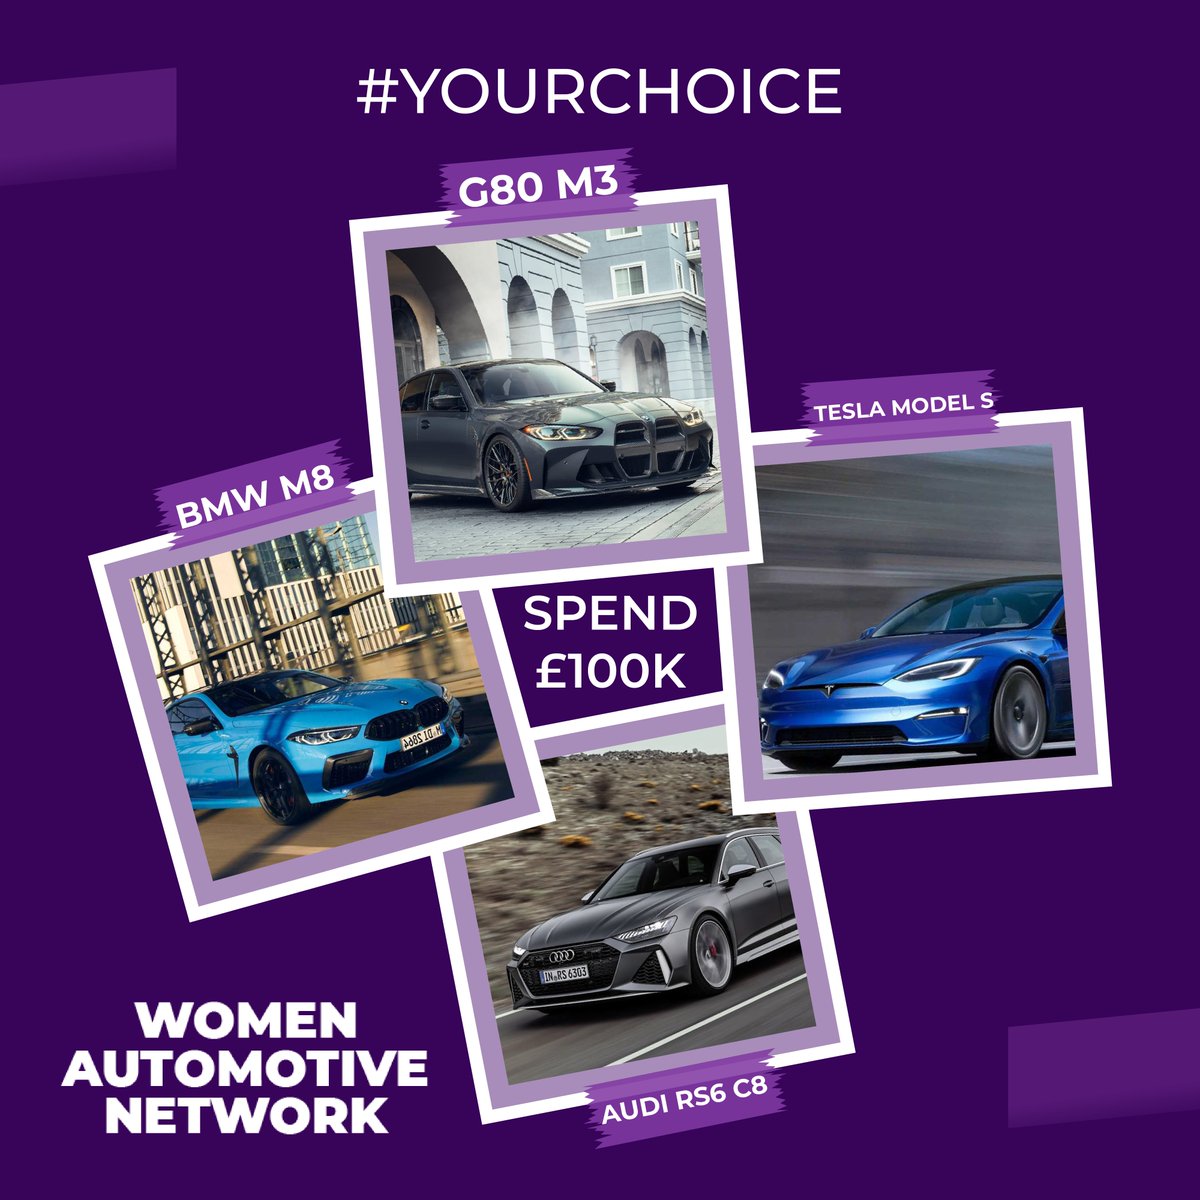 Now you've got £100,000 to spend on just one of these cars... which car are you buying?

#YourChoice #supercarlifestyle #carsandcoffee #supercars #supercarsday #carswithoutlimits #supercarsoflondon #supercarsdaily #amazingcars #fastcars #carshow #drivingperformance #germancars